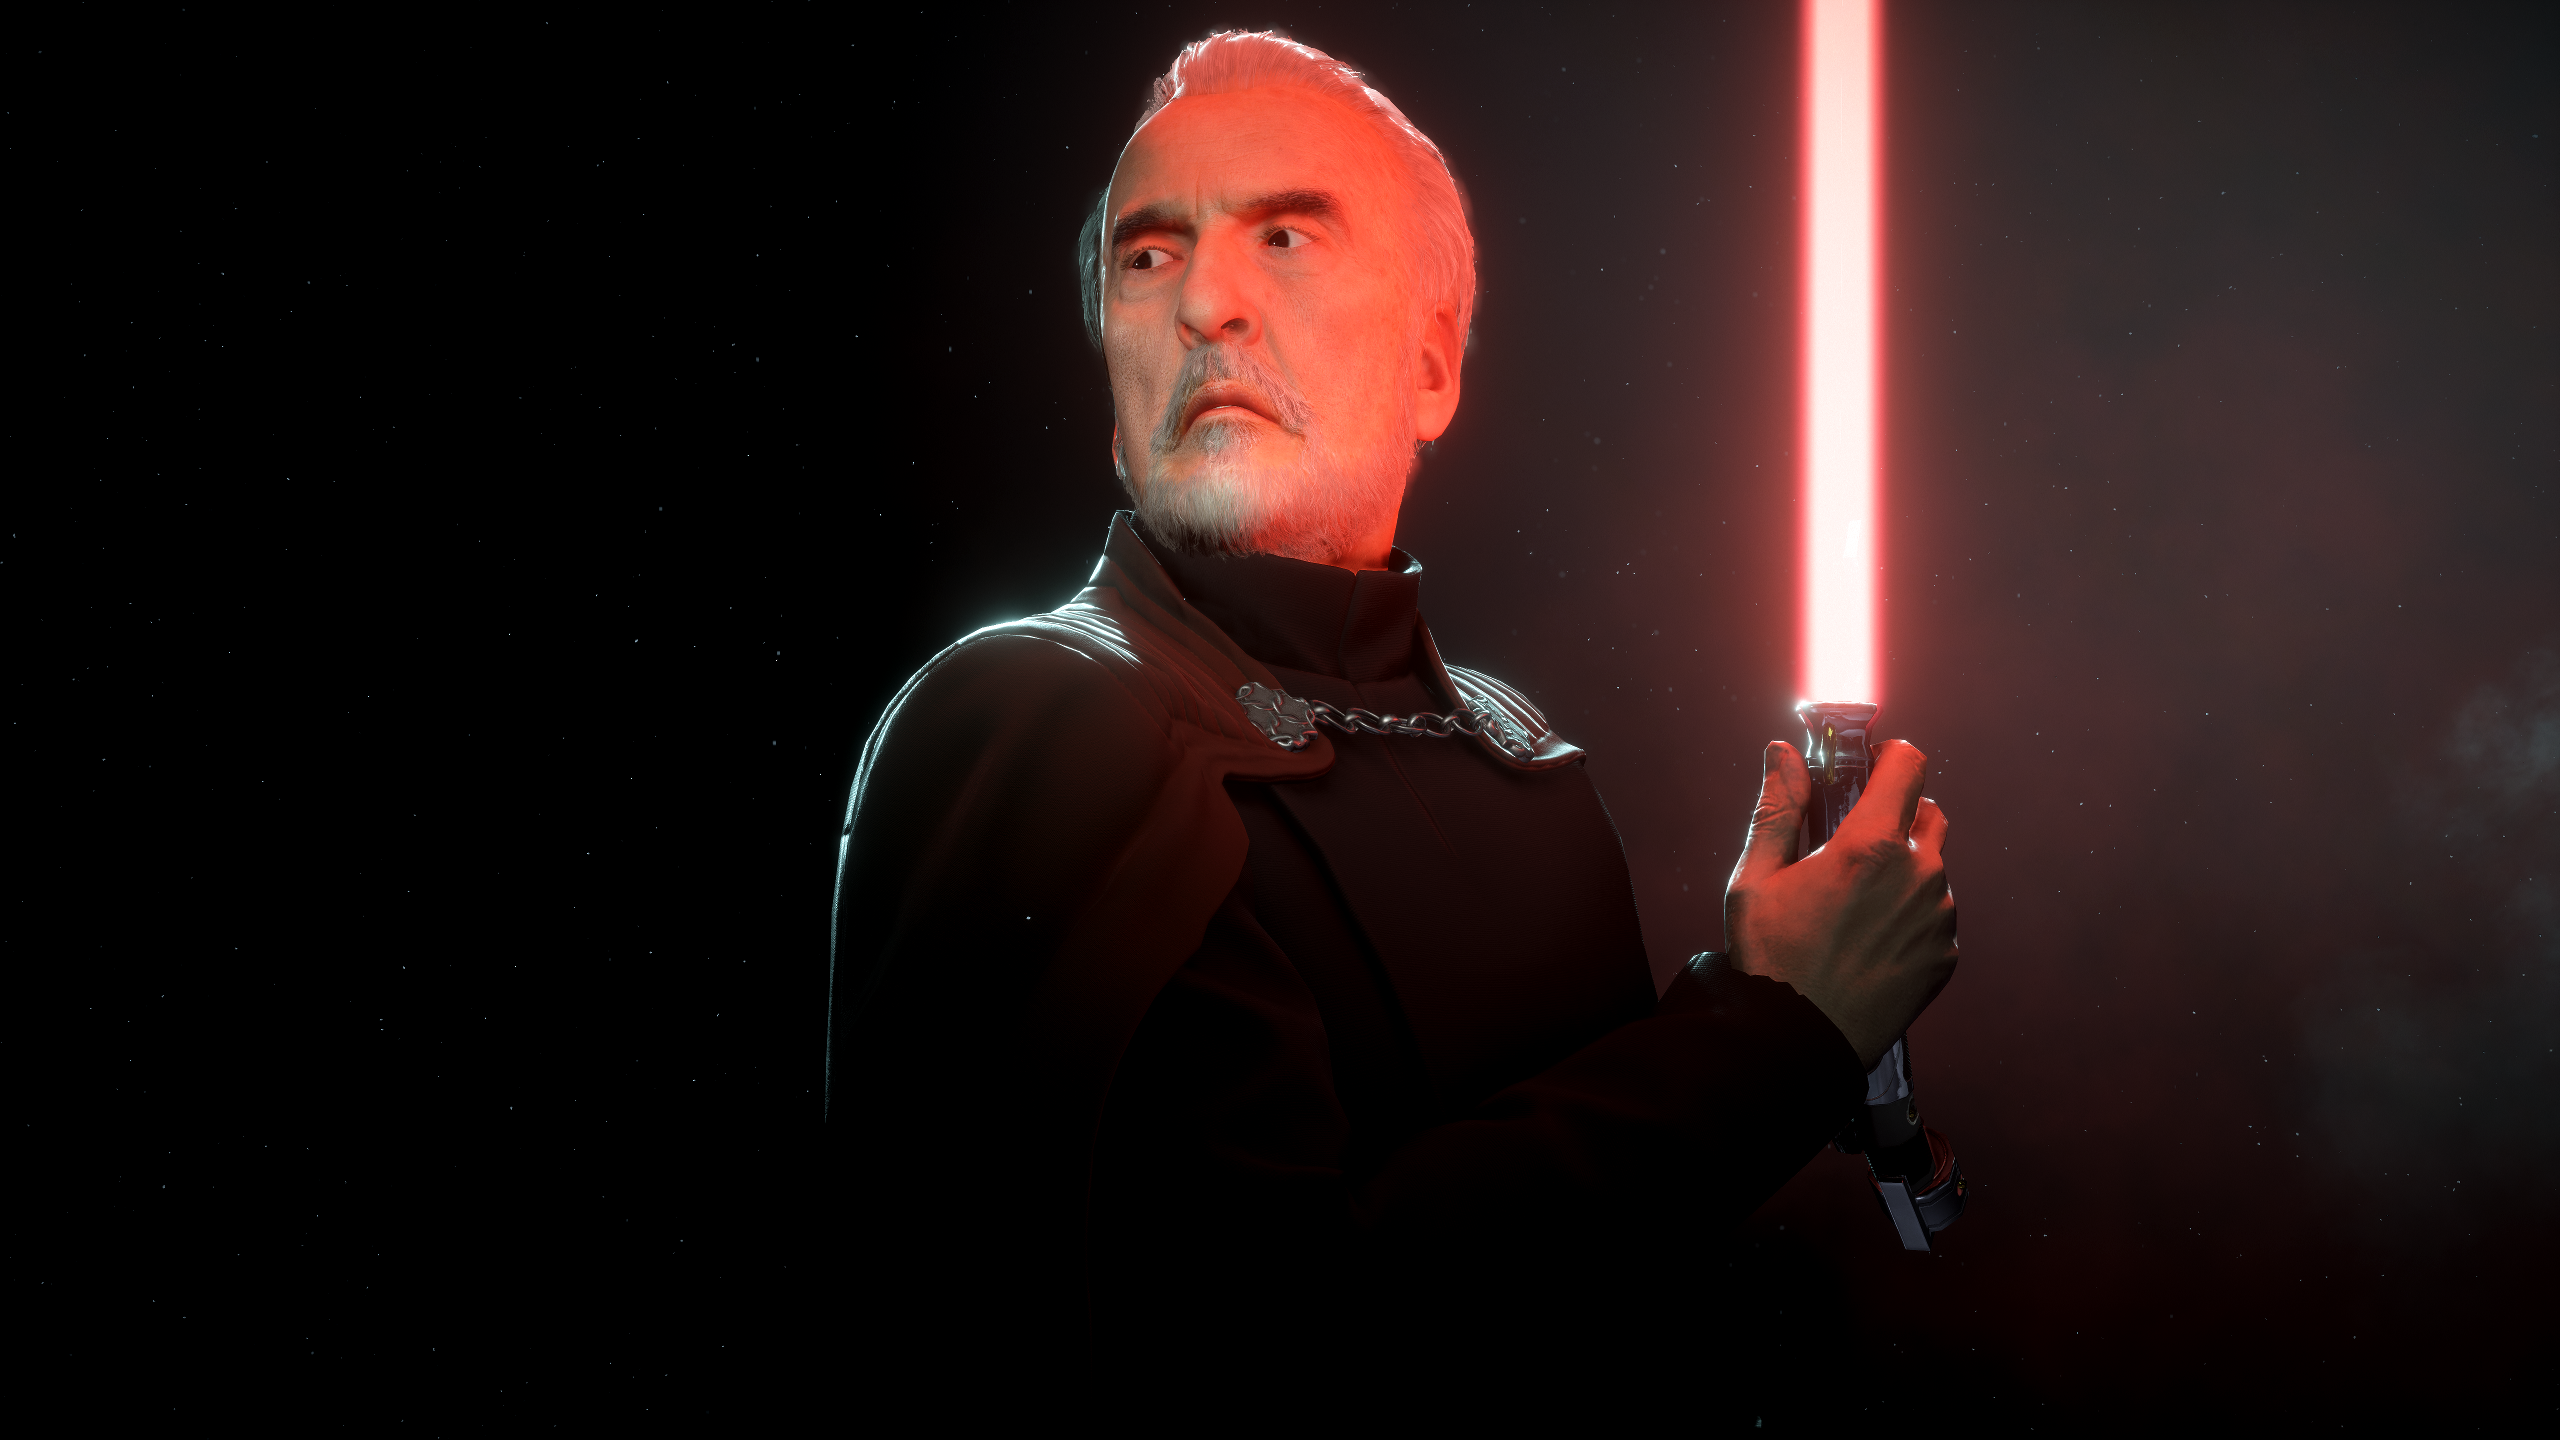 1440P Dooku wallpaper, DICE hit it out of the park with this one